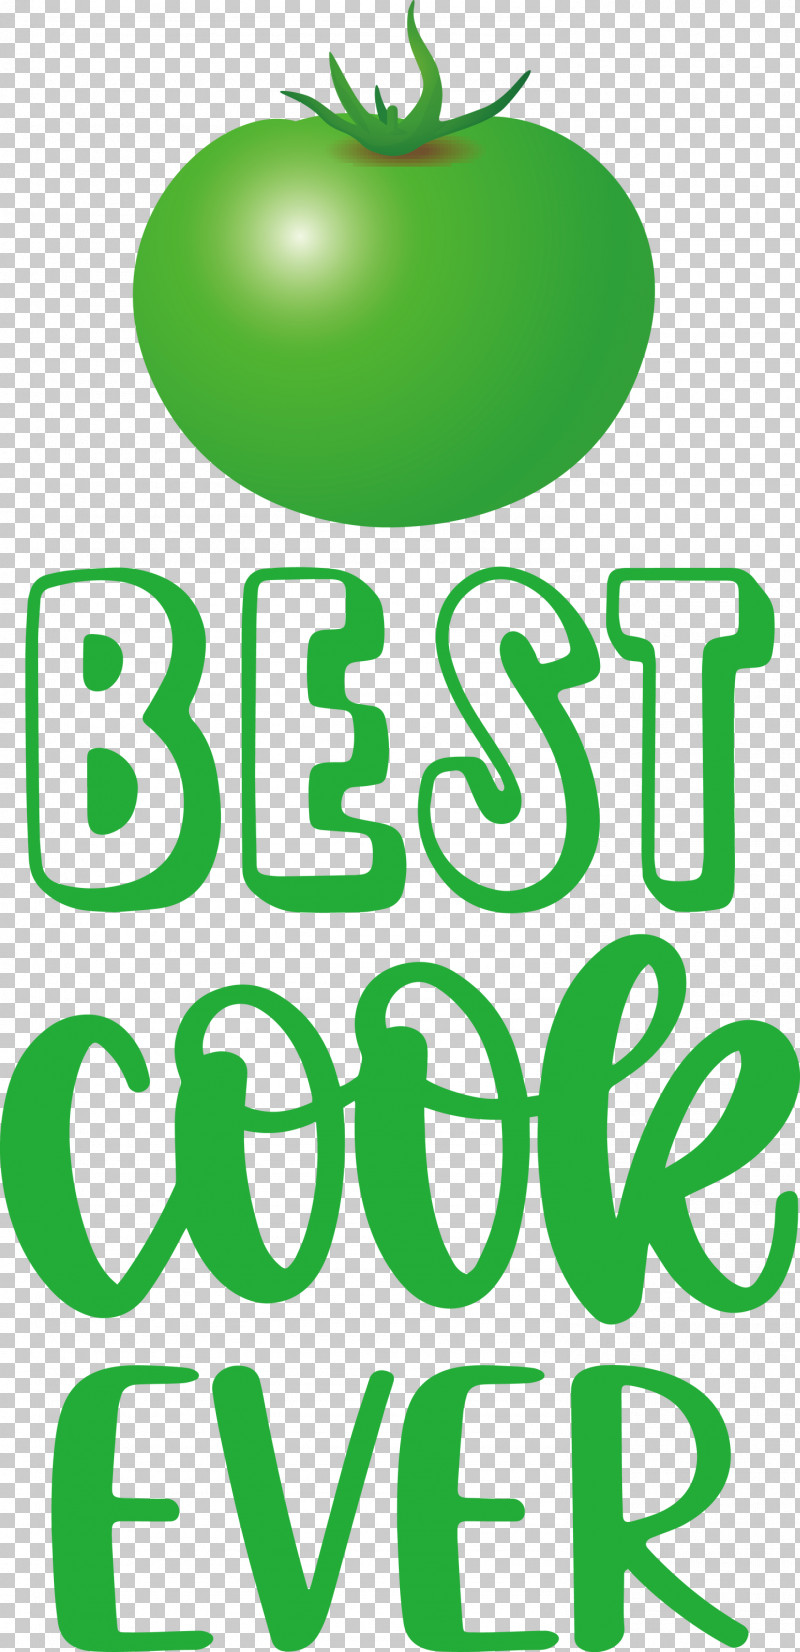 Best Cook Ever Food Kitchen PNG, Clipart, Apple, Food, Fruit, Green, Kitchen Free PNG Download